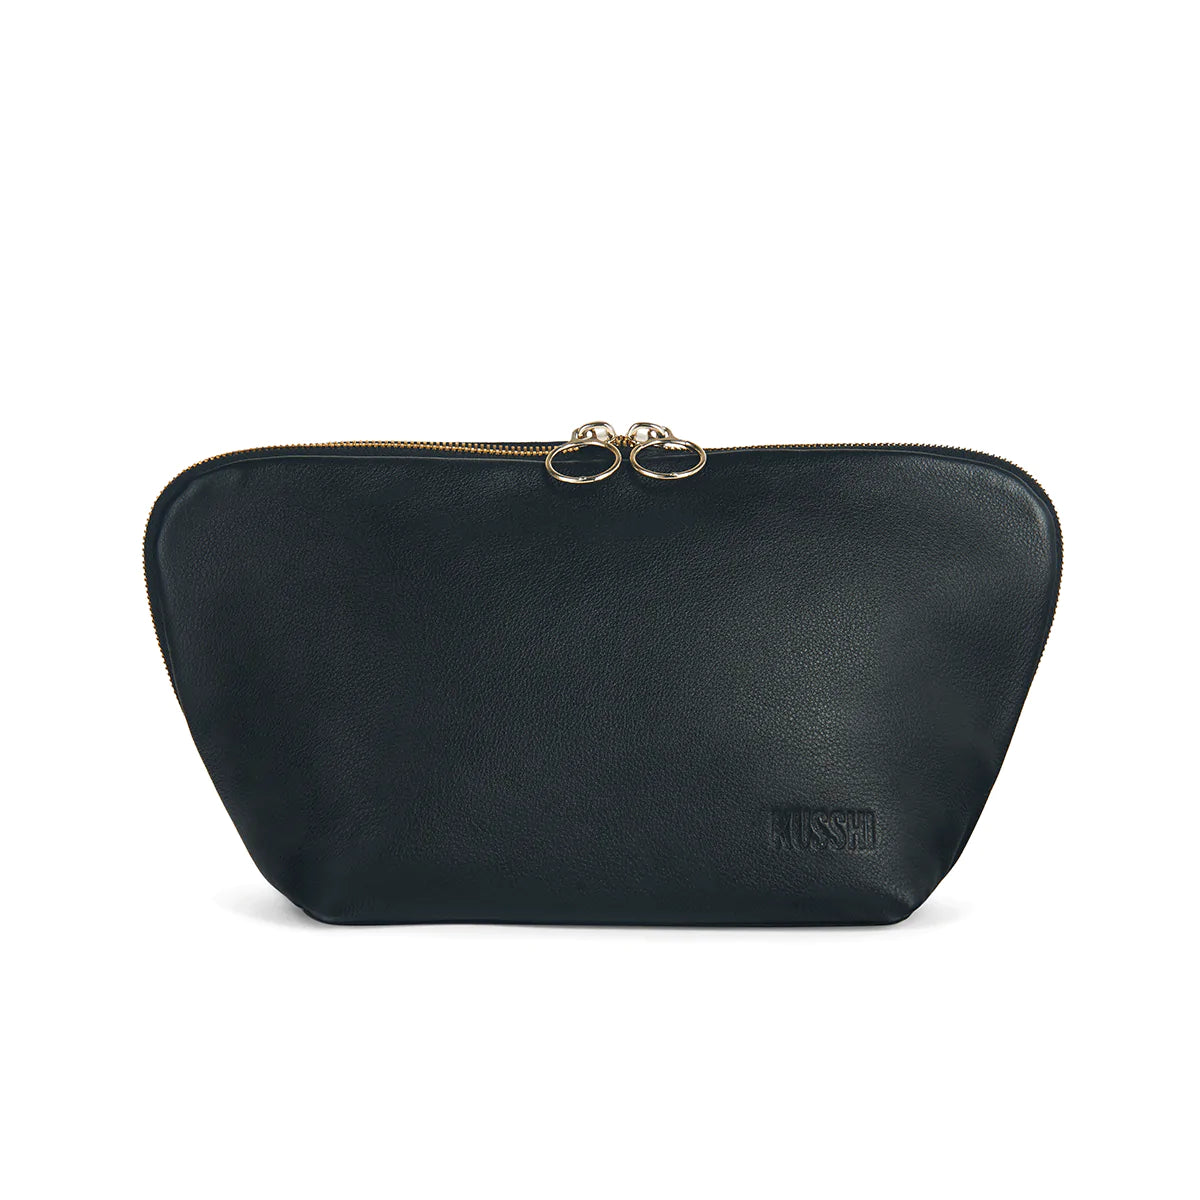 KUSSHI Signature Makeup Bag Black Leather with Red Interior